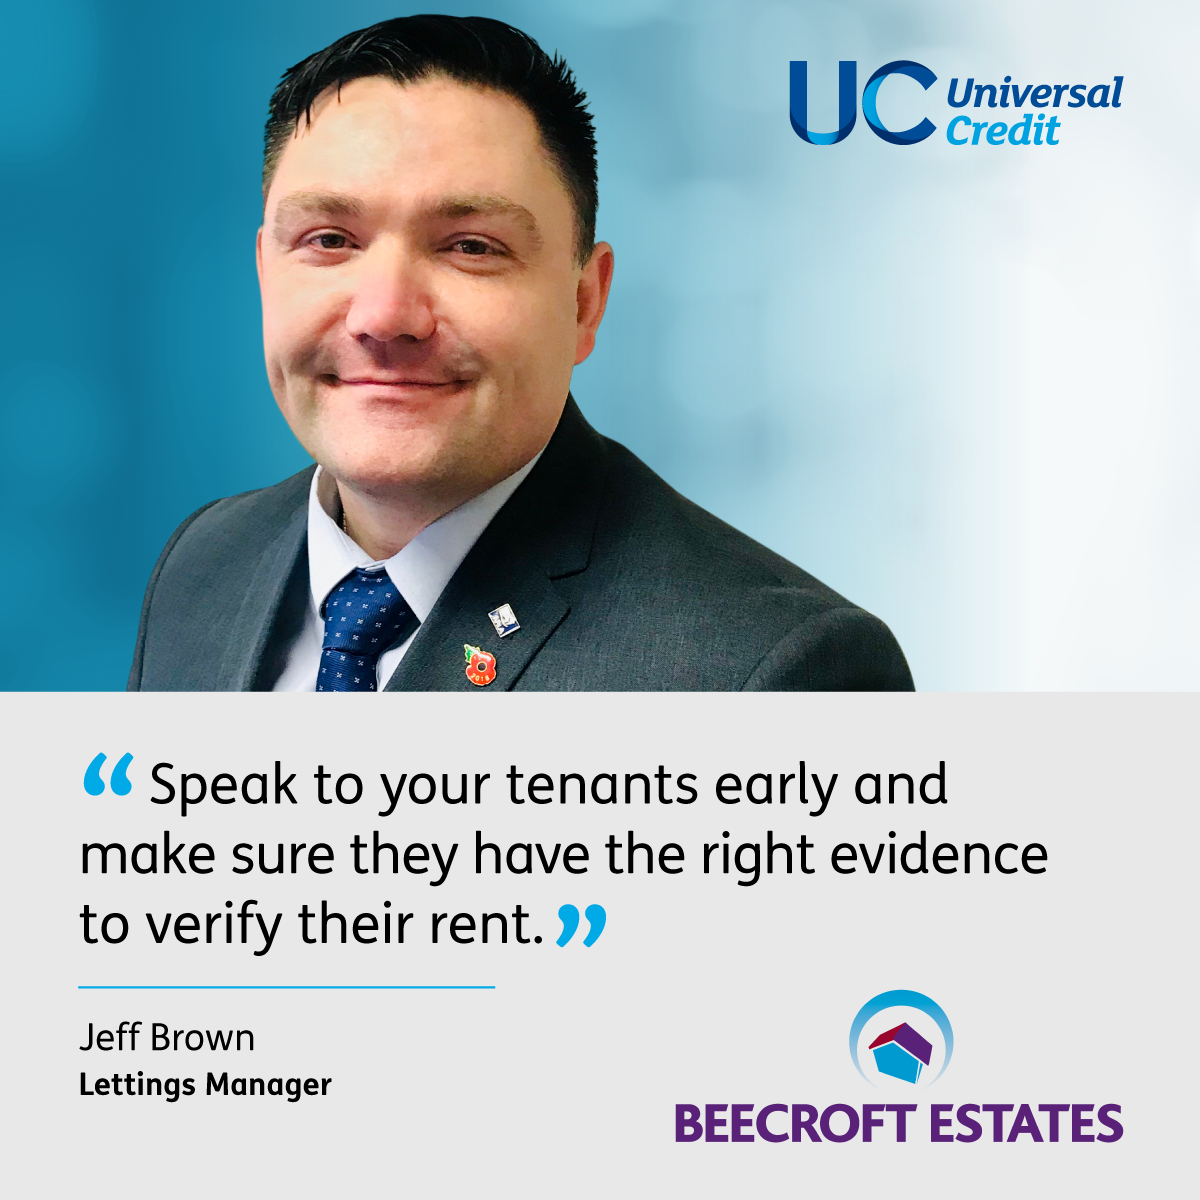 Photo of Jeff Brown of Beecroft Estates. Quote "Speak to your tenants early and make sure they have the right evidence to verify their rent."